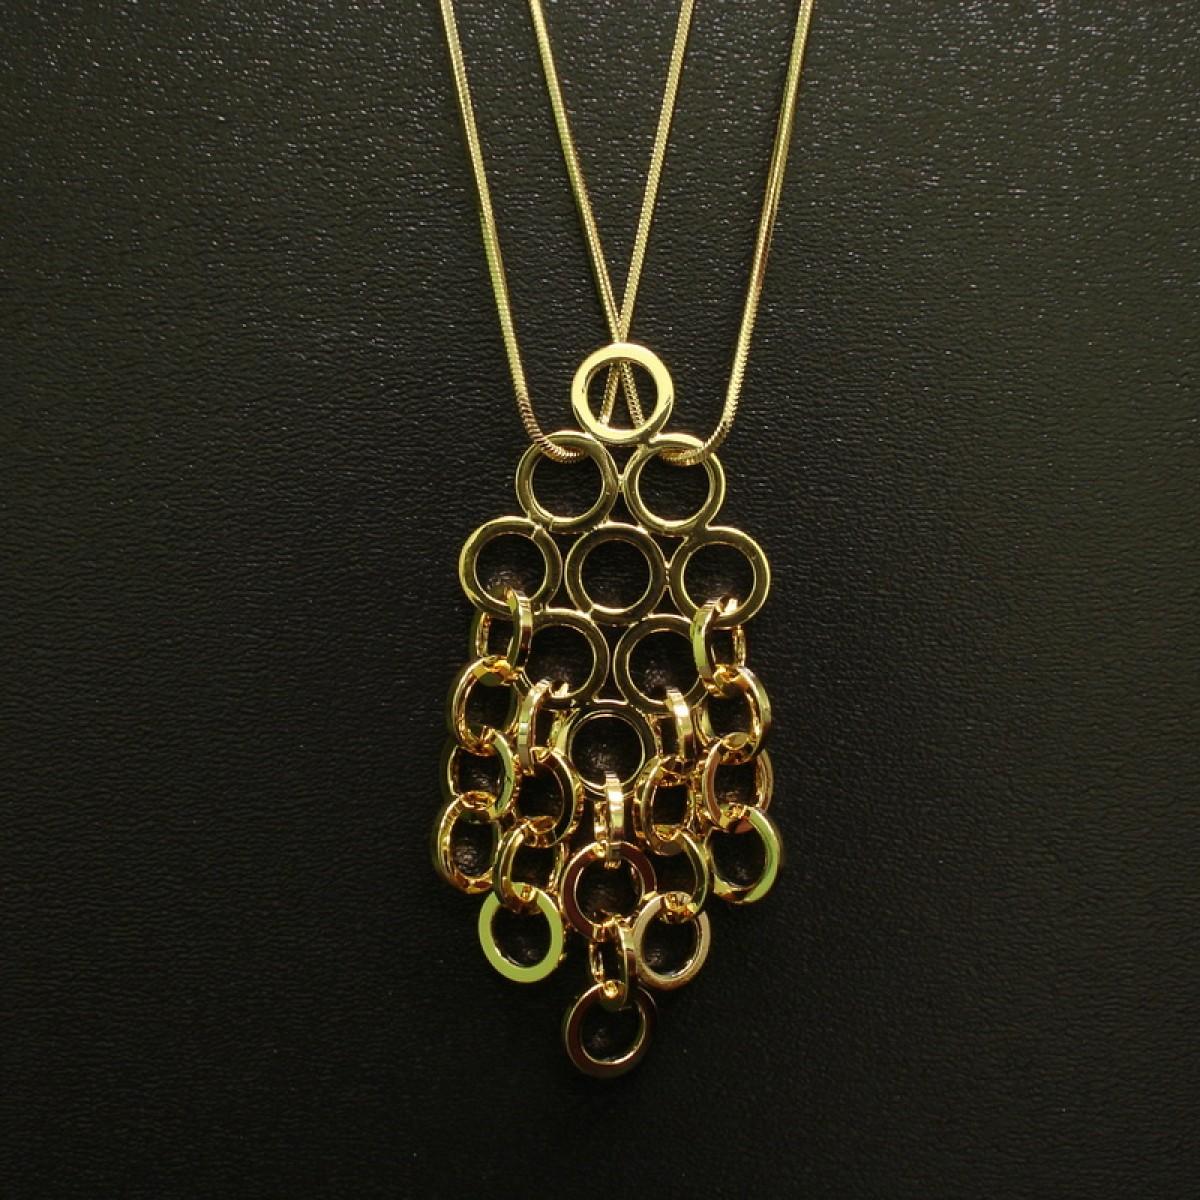 Gold with Circles Necklace